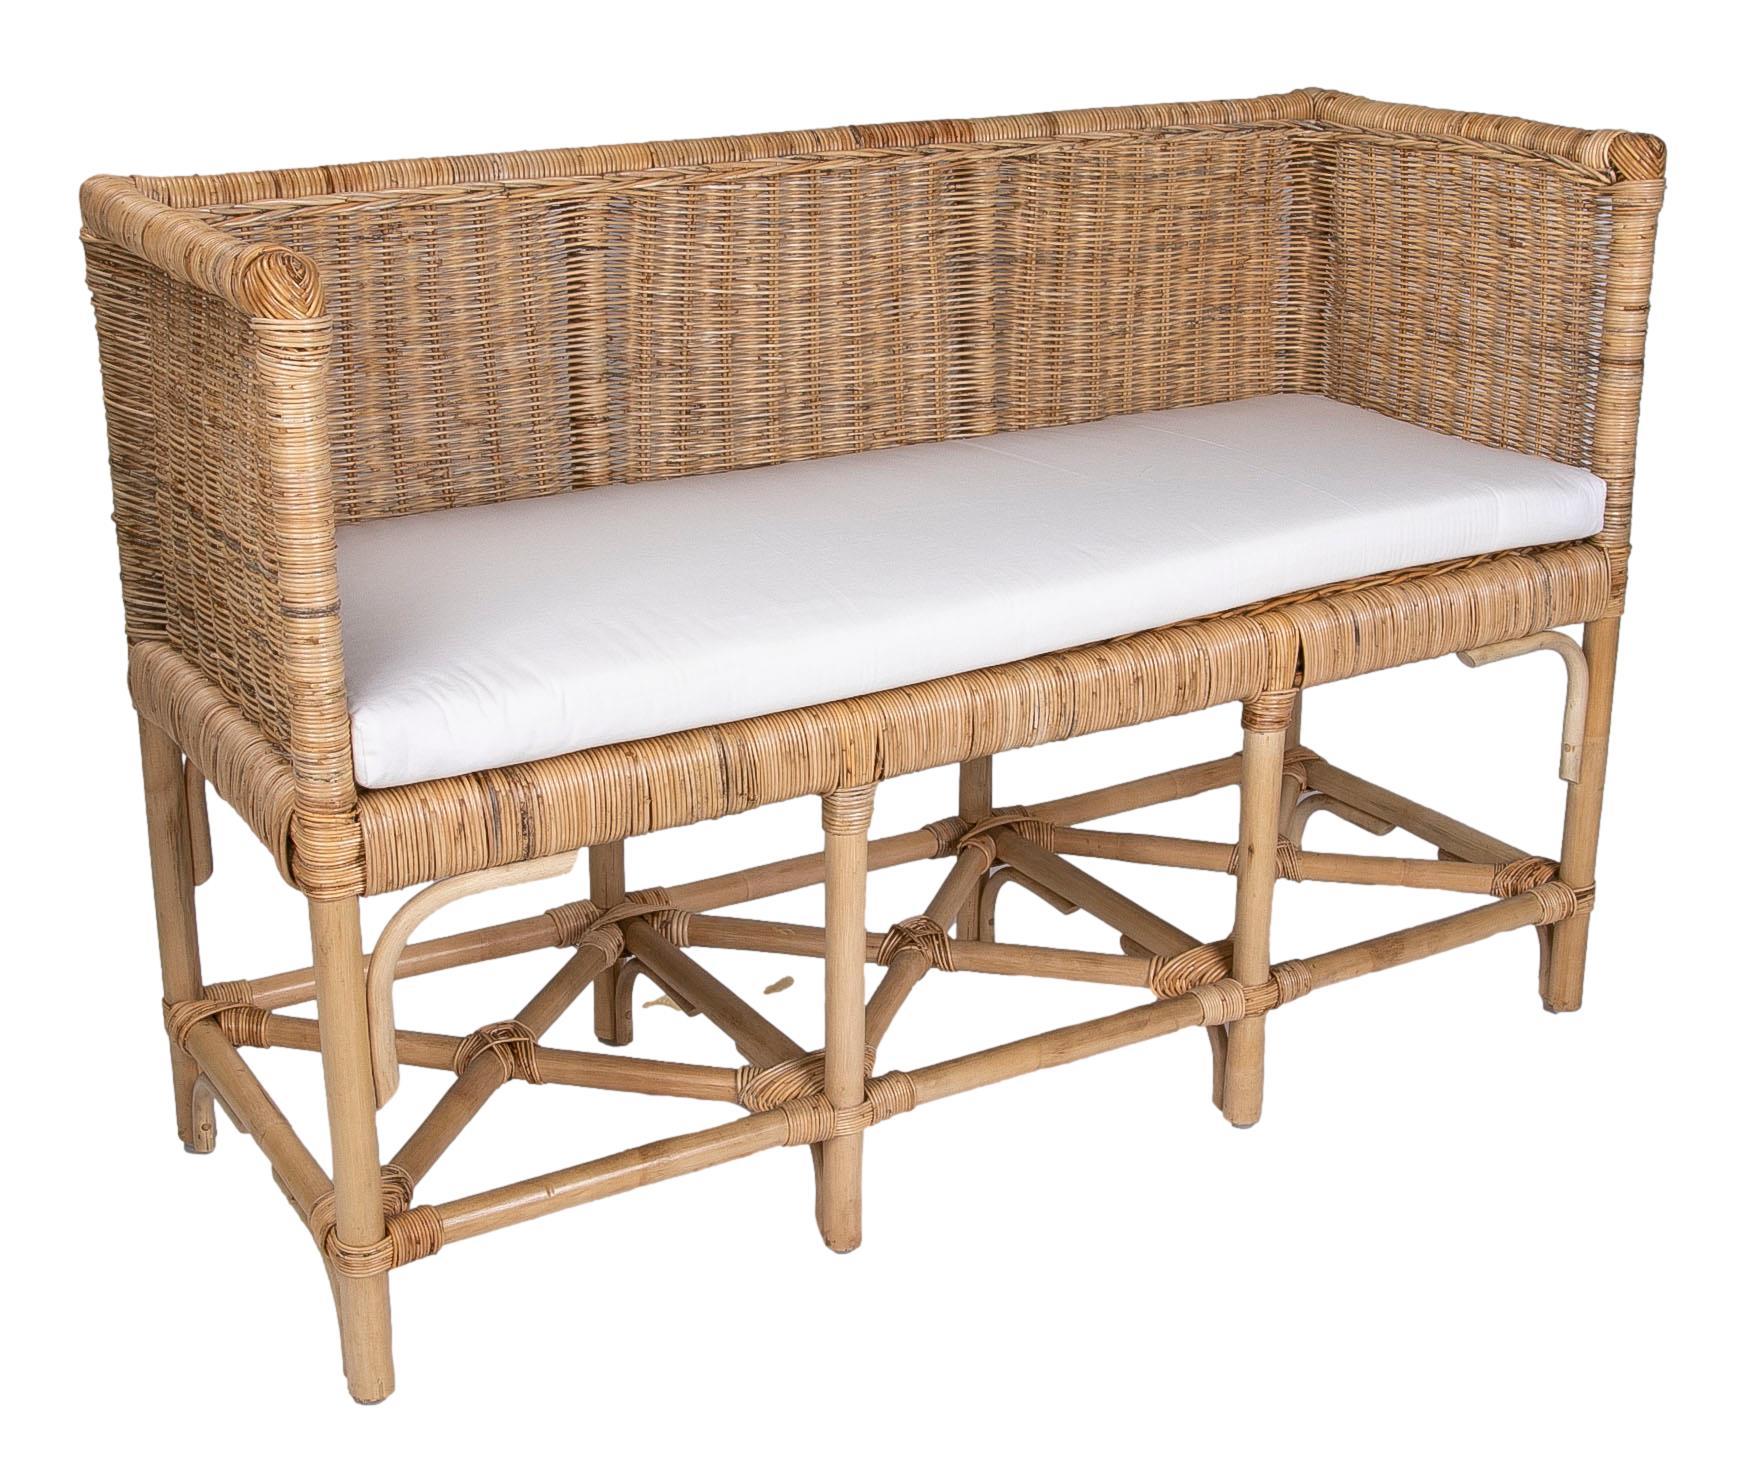 European Pair of Handmade Rattan Benches with Straight Arms and Backrest